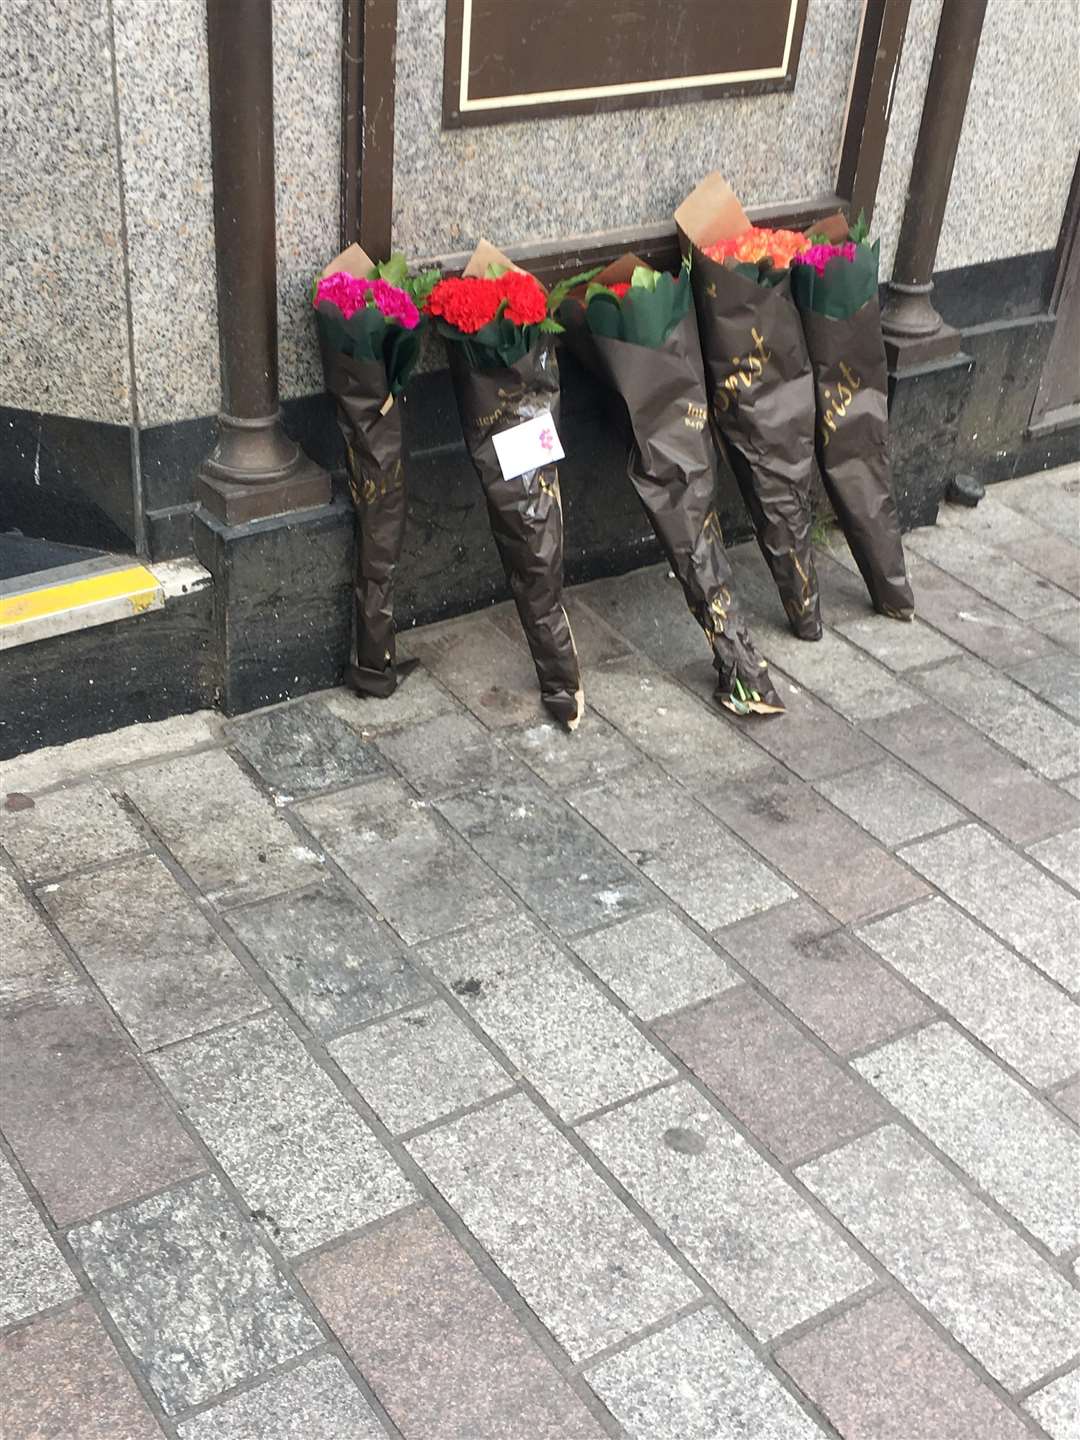 Flowers Left in Jubilee Square where a man was found dead. (3167364)